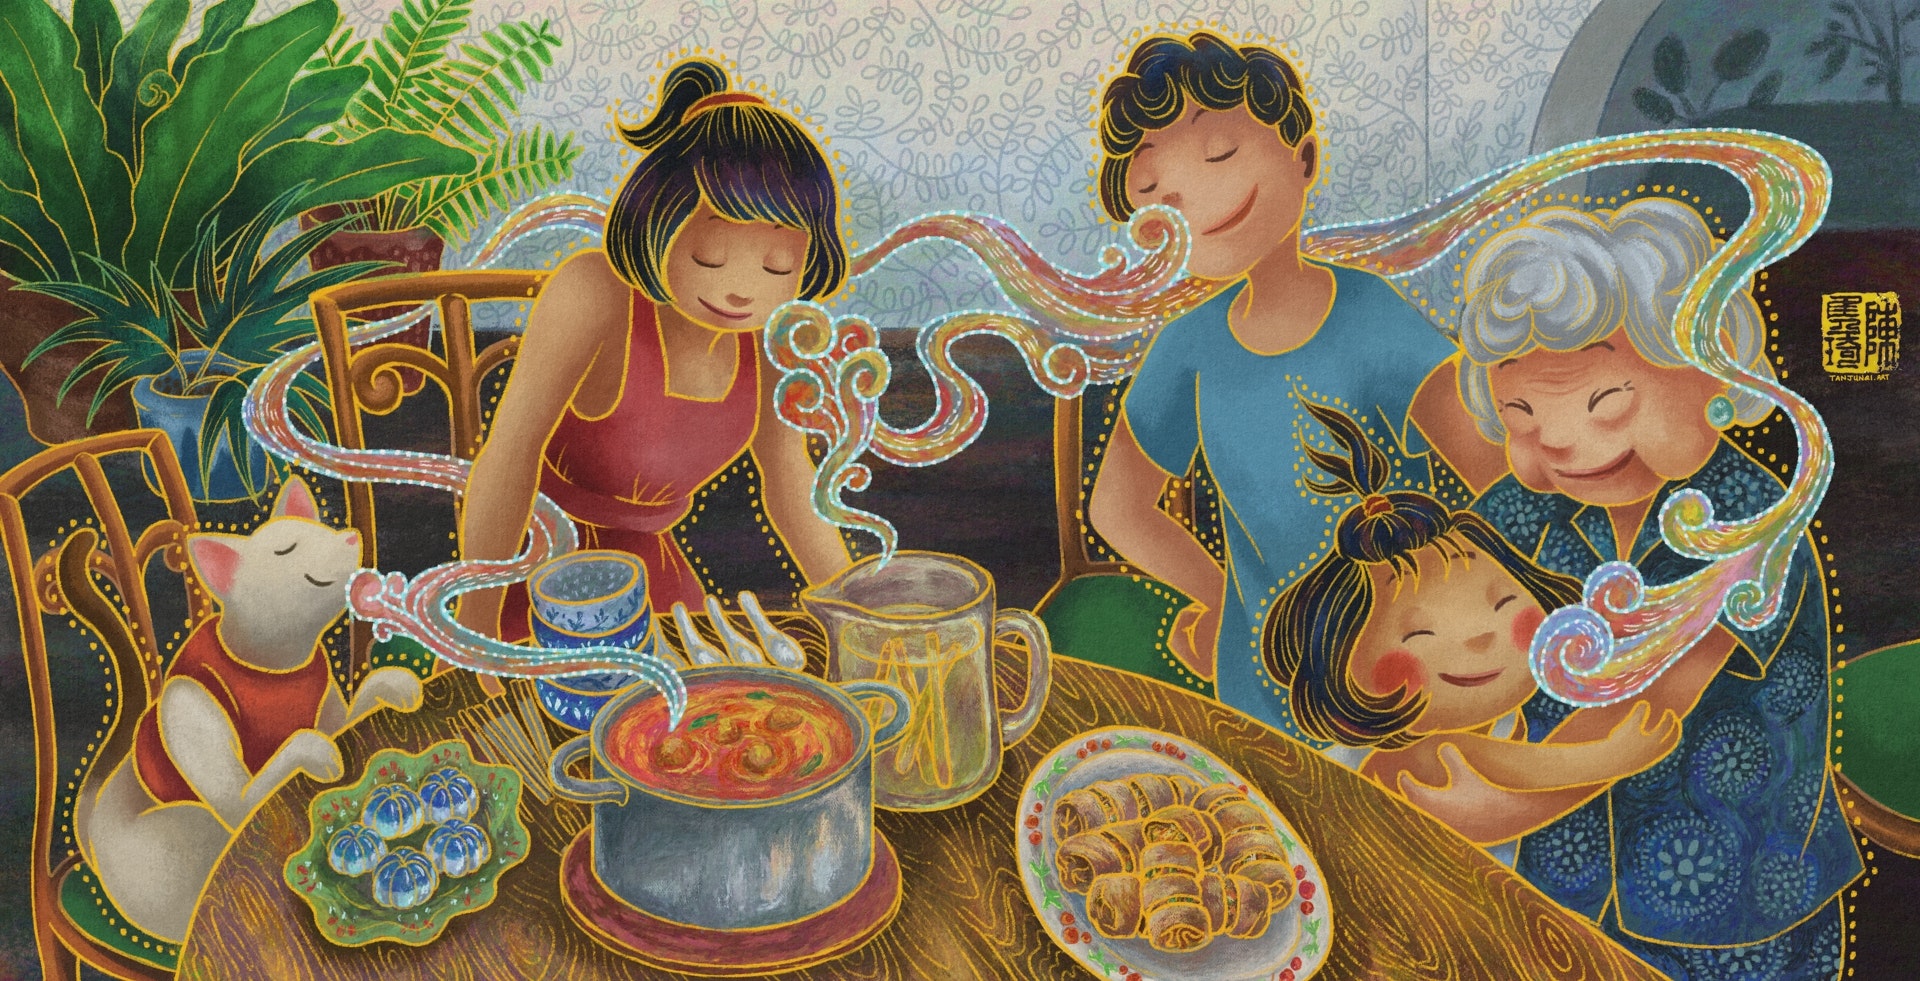 Digital painting with chalk texture and batik-inspired style and motifs, of the young girl and her family gathered around a dining table in anticipation of a delicious dinner. The young girl is hugging her grandmother, who is wearing a dark blue cottom dress with white circular batik motifs. Her father has his arms on his hips, head lifted up as he sniffs and avours the delicious scent of food, while her mother is leaning forward on the table, also deeply breathing the scent in. The cat is sitting on the chair on the far left side of the scene, paws on the table and also delighting in the scent of the food. On the wooden dining table there is a pot of curry, a plate of blue-pea-colored agar agar jelly, a plate of pohpiah springrolls, a jug of lemongrass drink, and a stack of bowls and some chopsticks beside them. There are some potted plants (ferns and palms) in the background